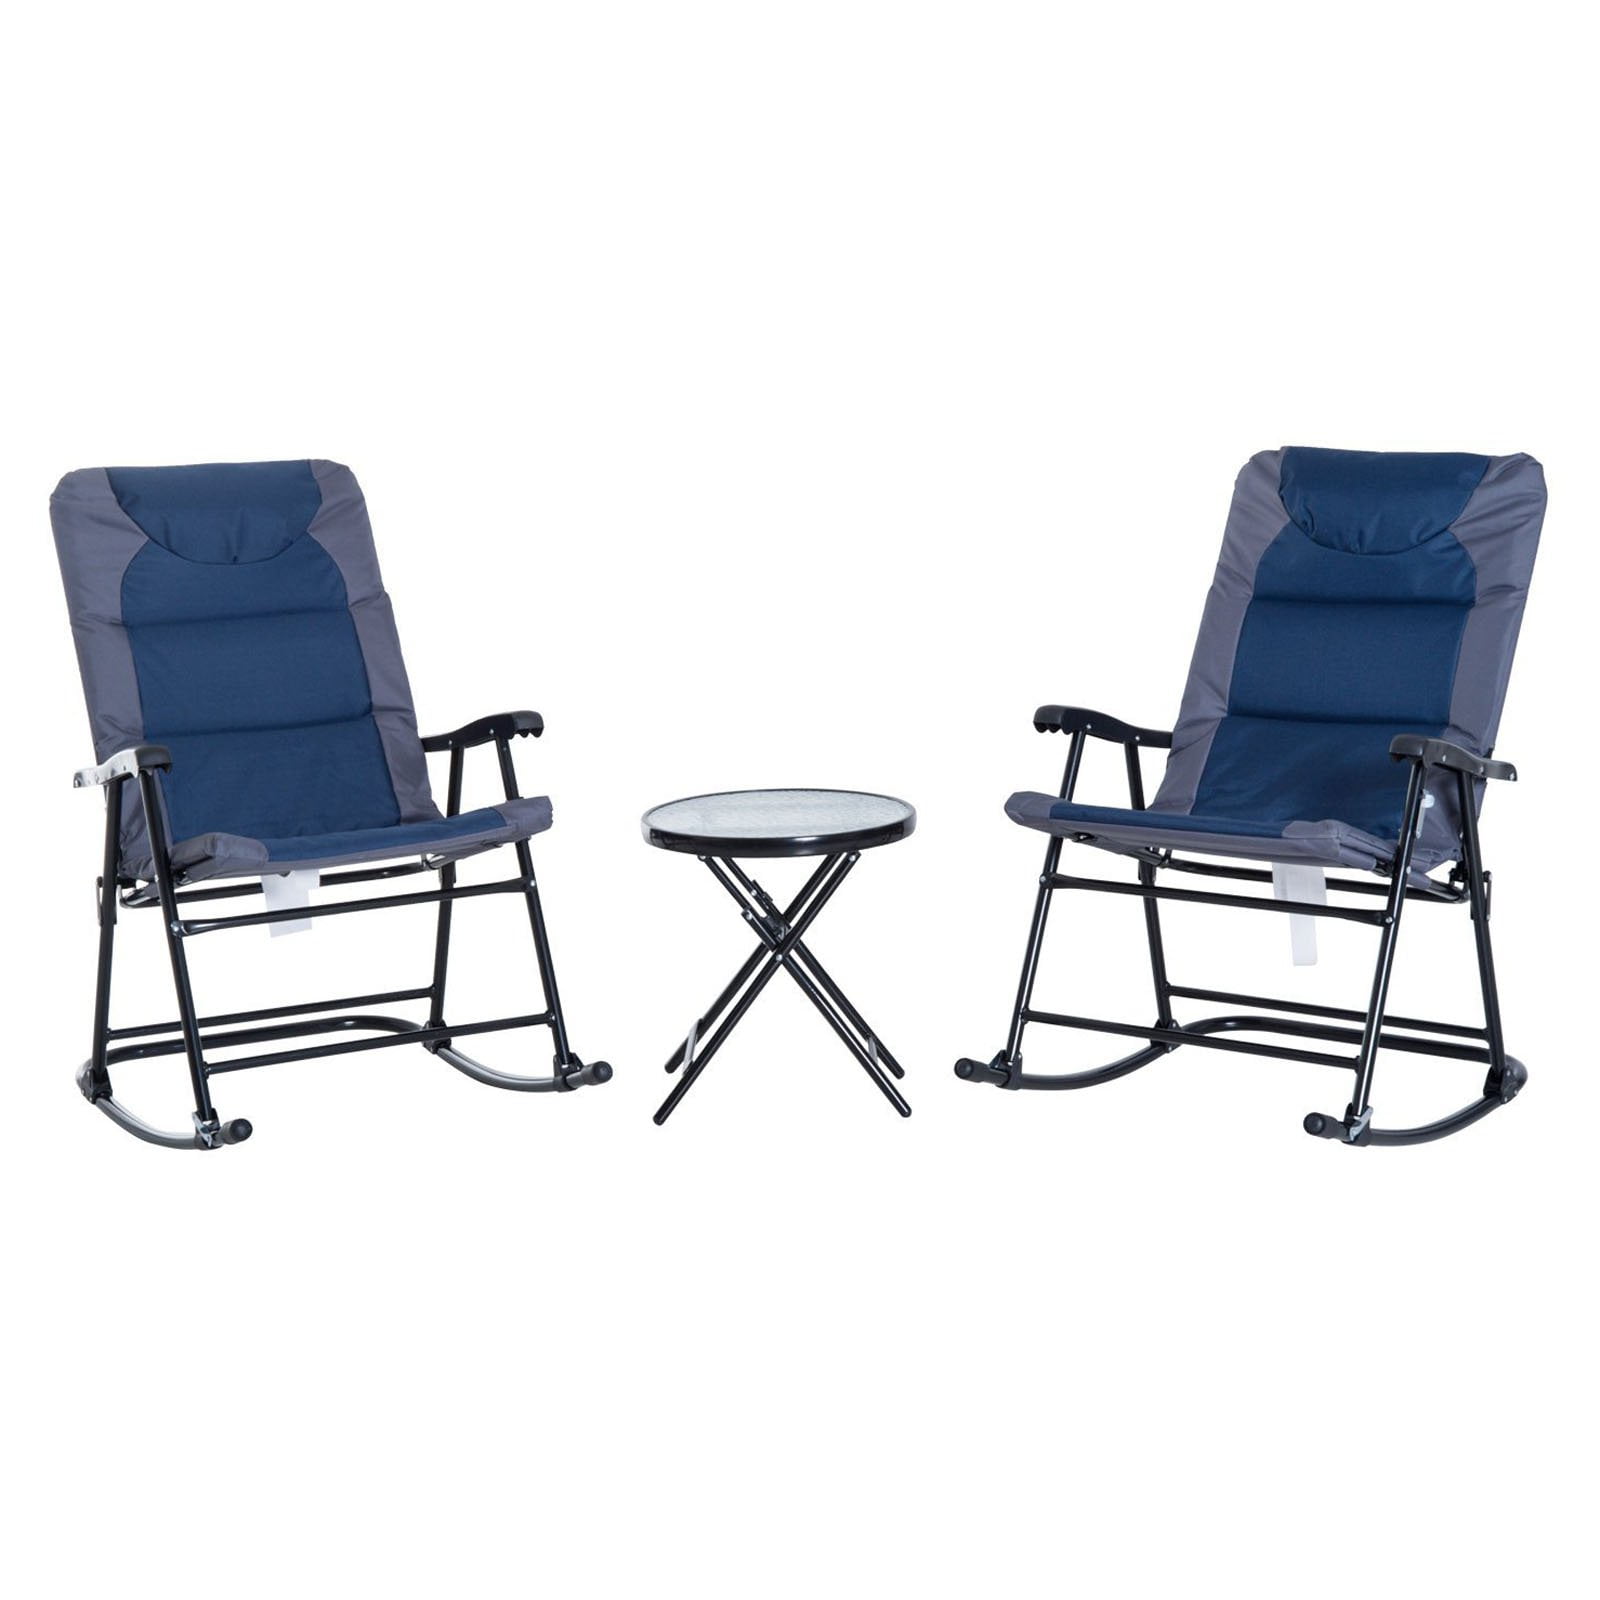 Outsunny 3 Piece Folding Outdoor Rocking Chair and Table Set - Walmart